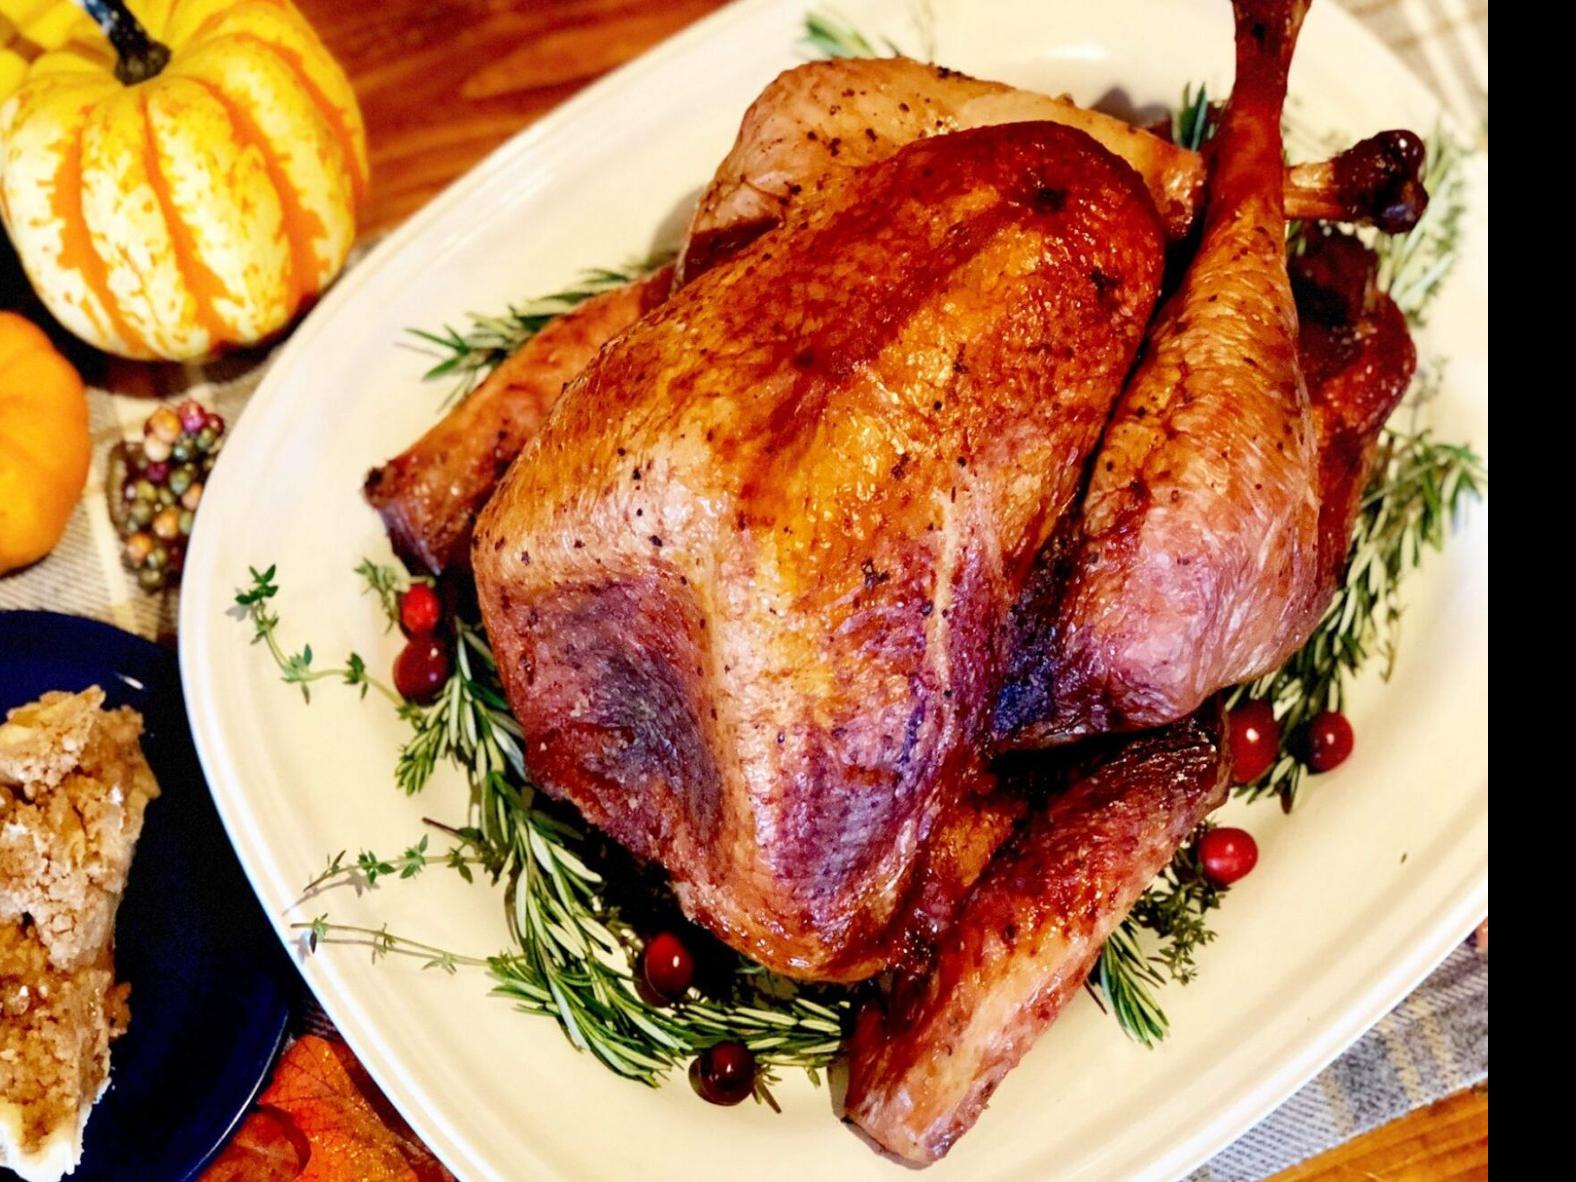 Thanksgiving options to eat-in or take out from Buffalo restaurants Dining |